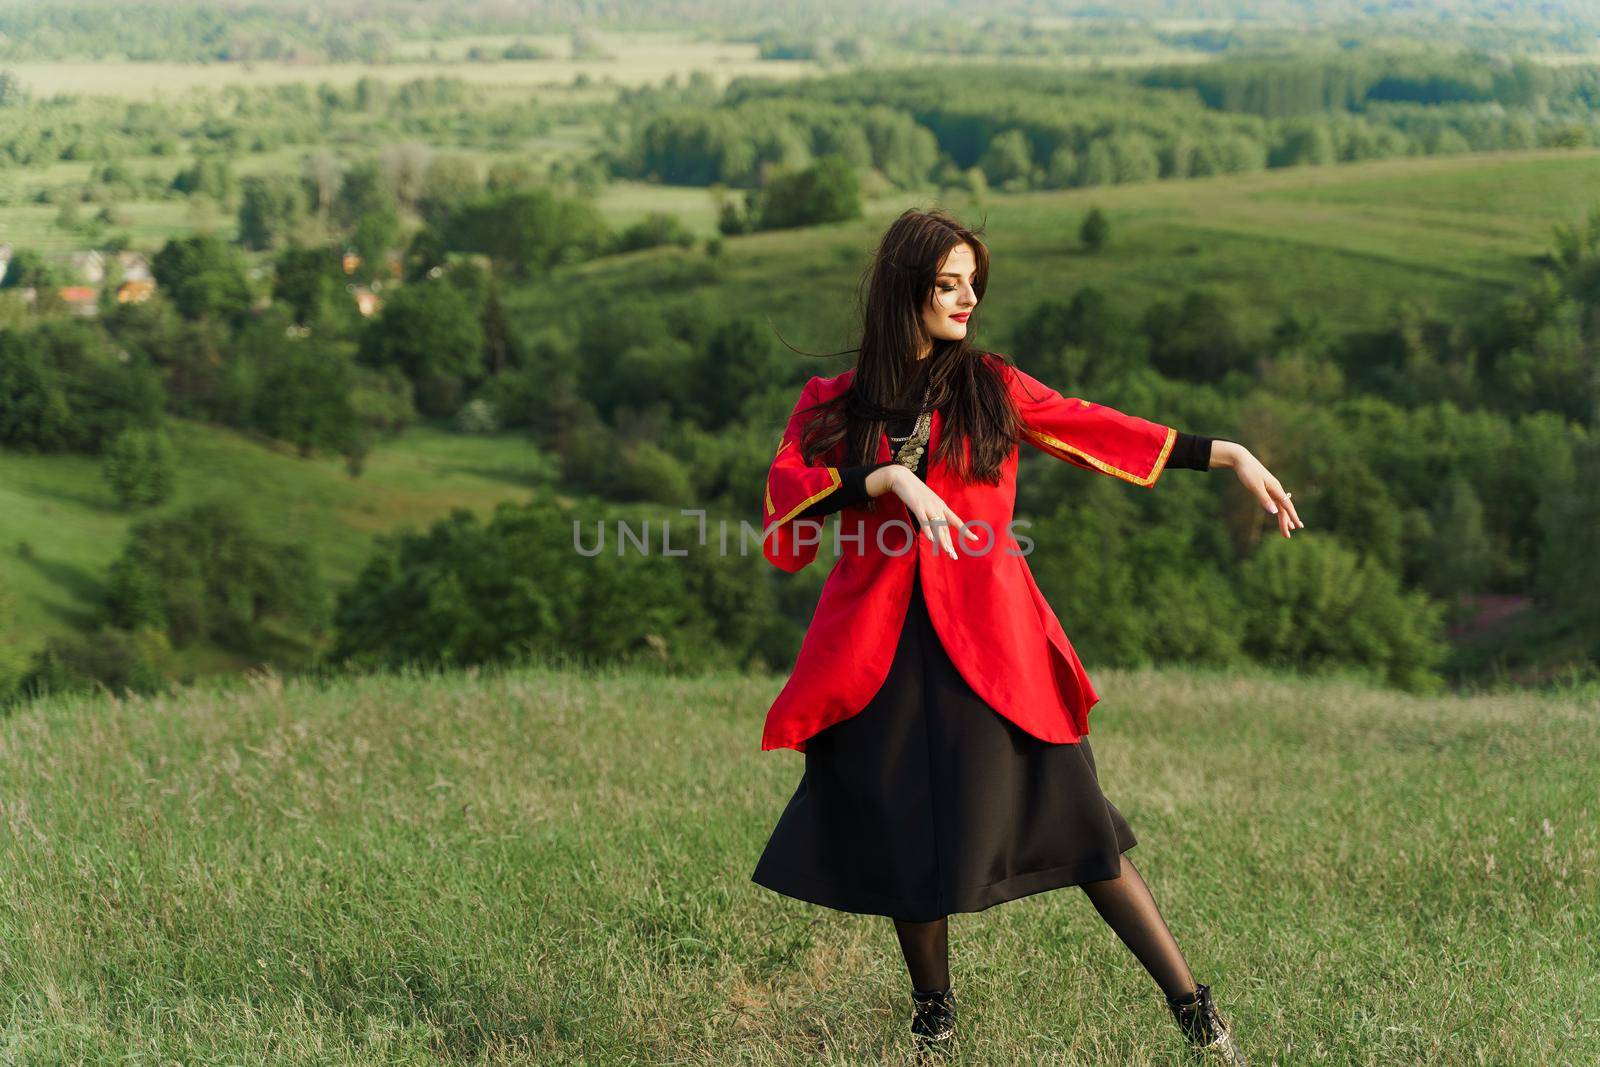 Georgian woman dances national dance in red national dress on the green hills of Georgia background. Georgian culture lifestyle.